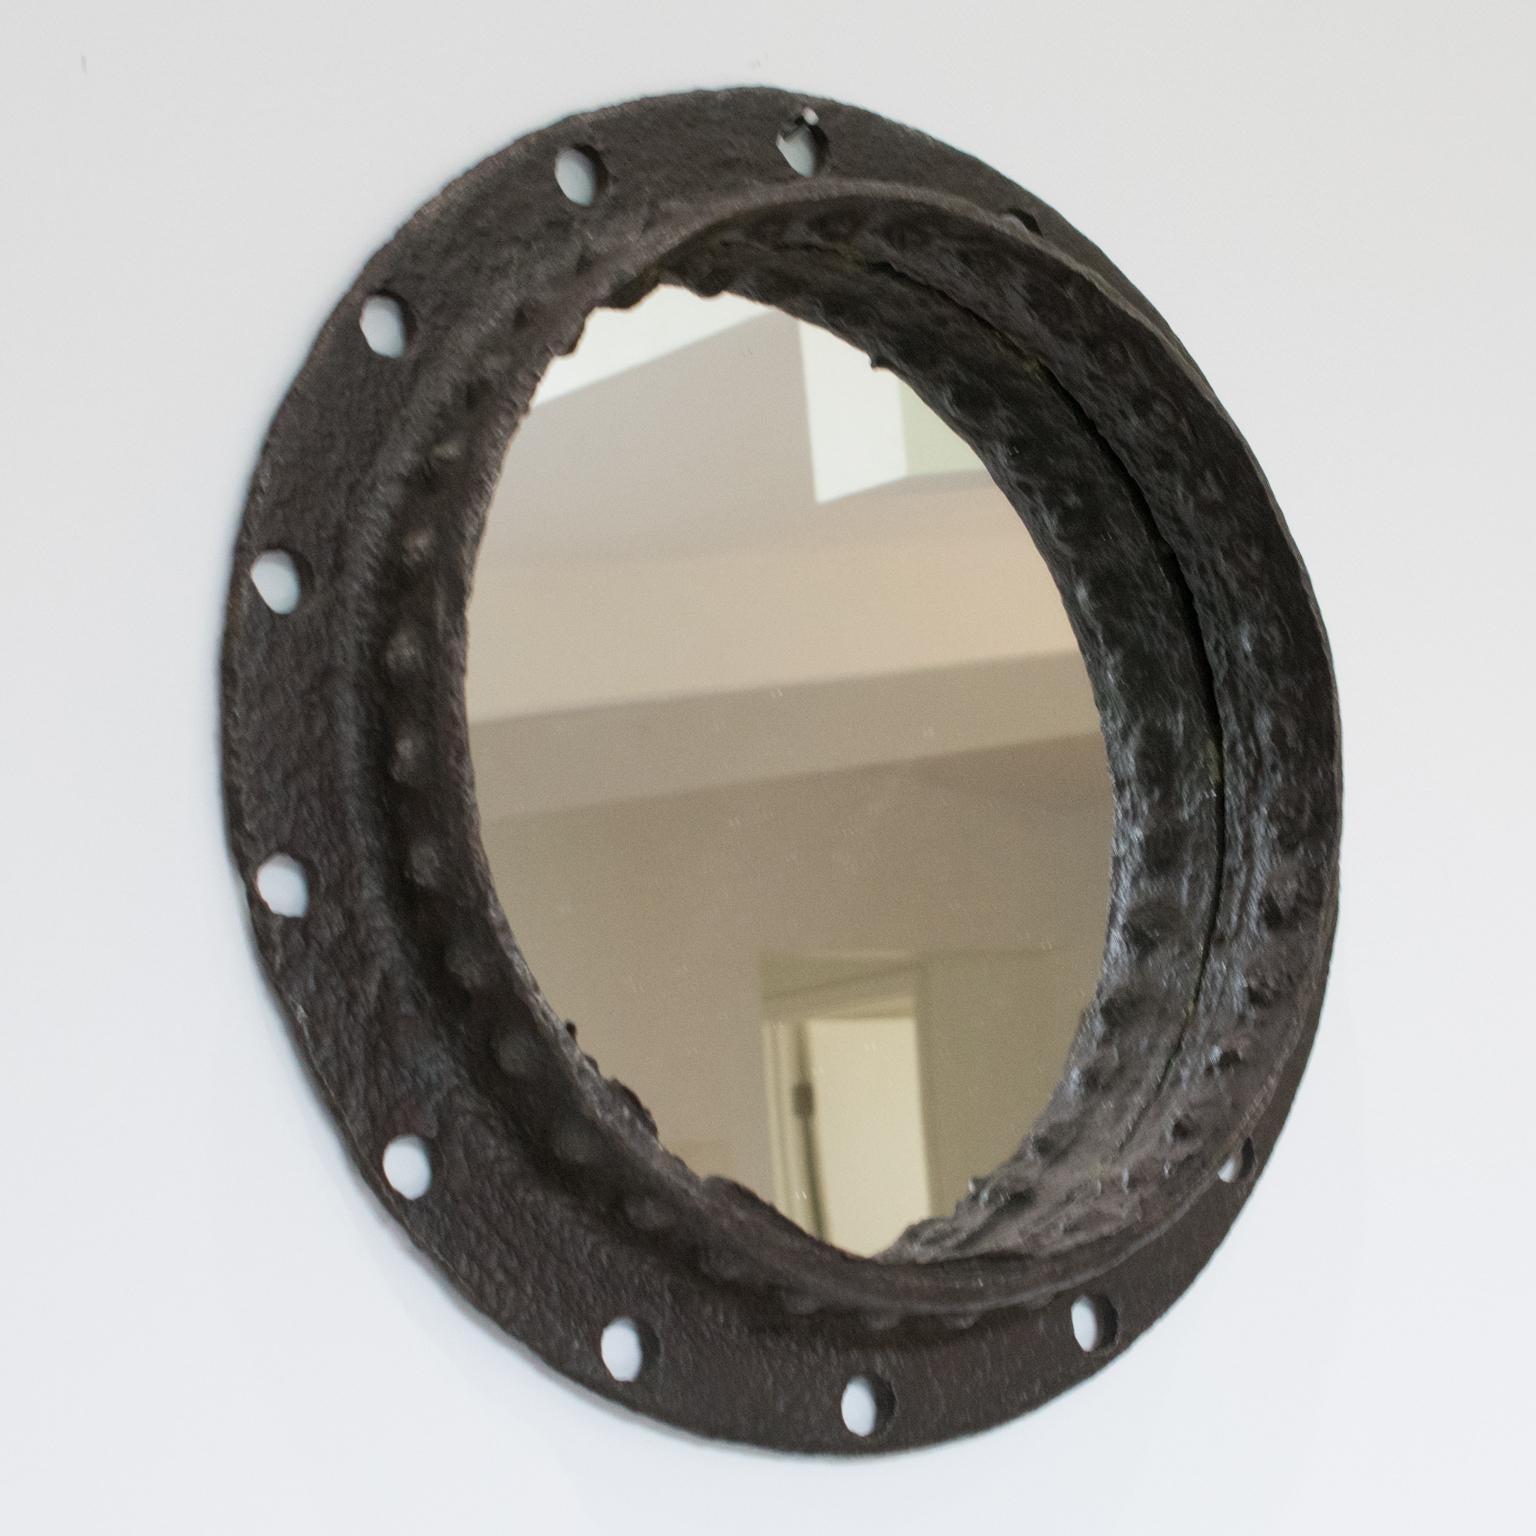 This stunning brutalist industrial wrought iron wall-hanging mirror was crafted in France. The massive round shape boasts an incredible metal framing with its original gunmetal patina. This mirror is a reclaimed salvage piece from an industrial